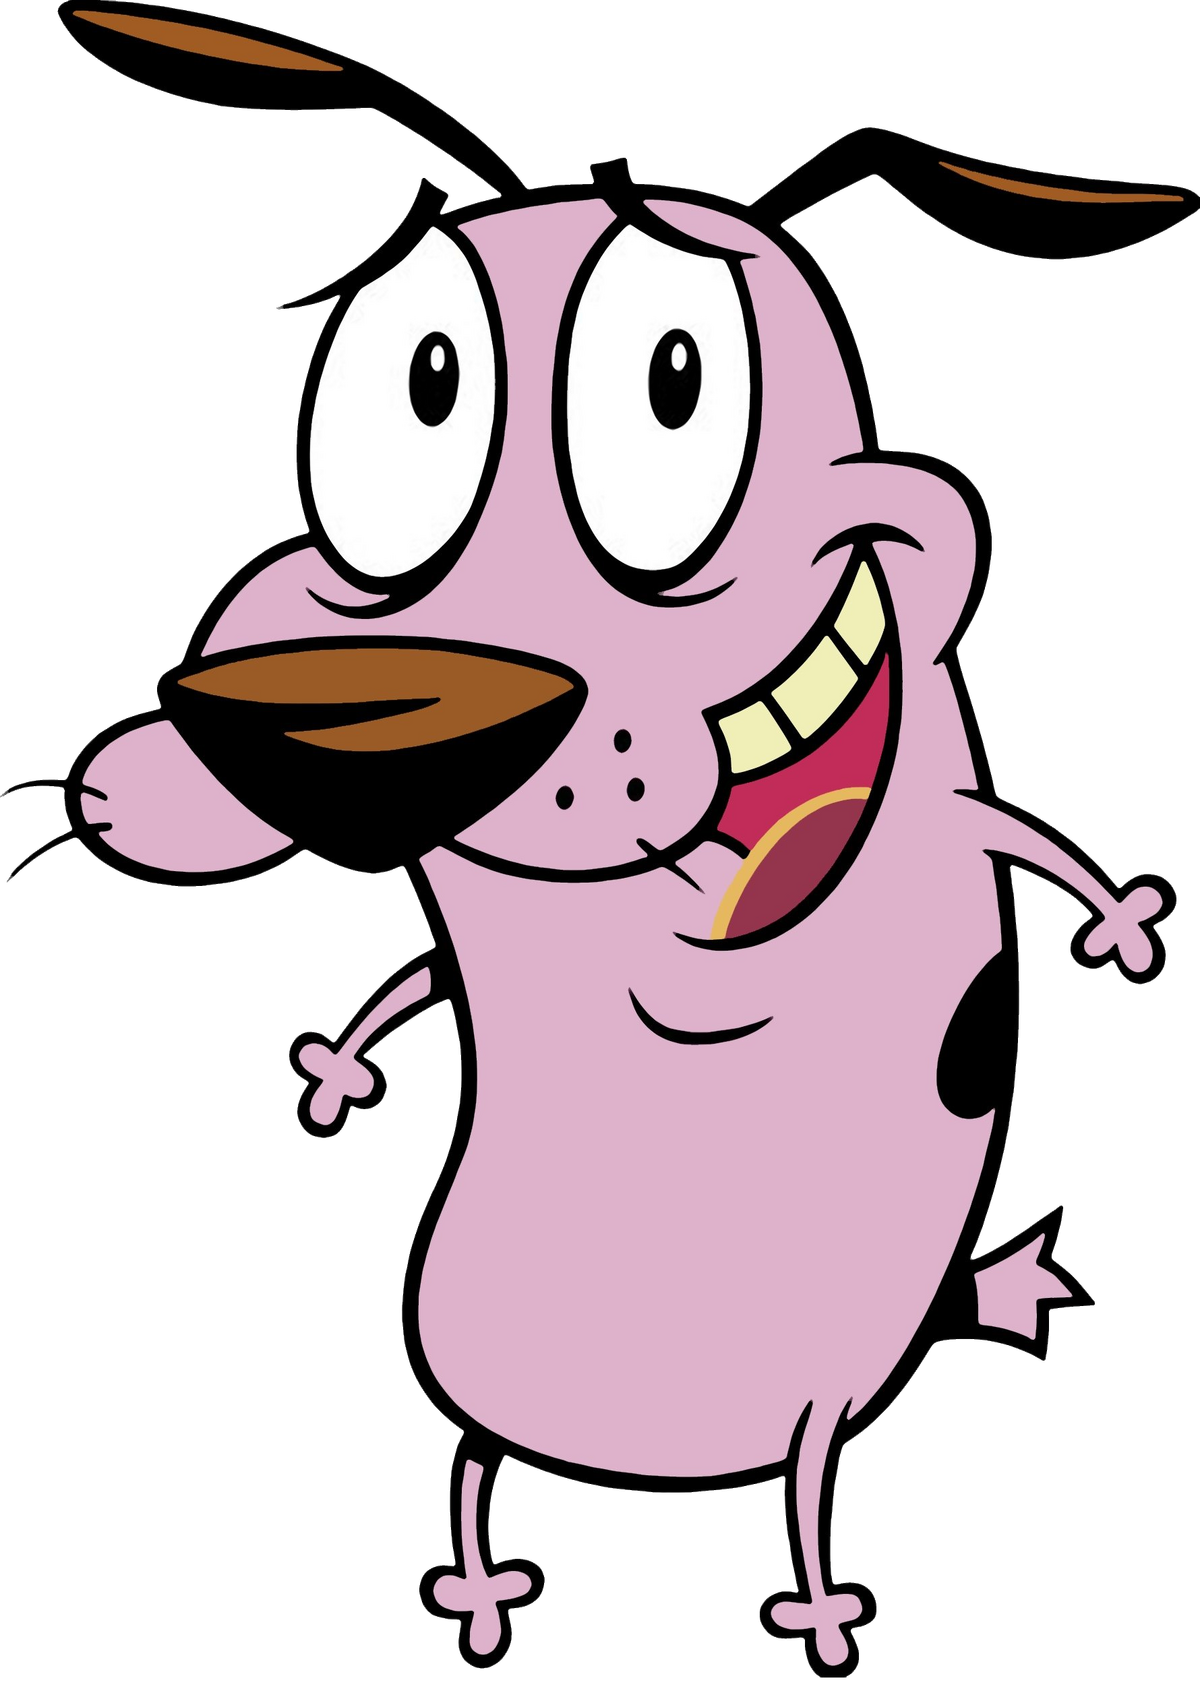 Courage/Gallery | Courage the Cowardly Dog | Fandom